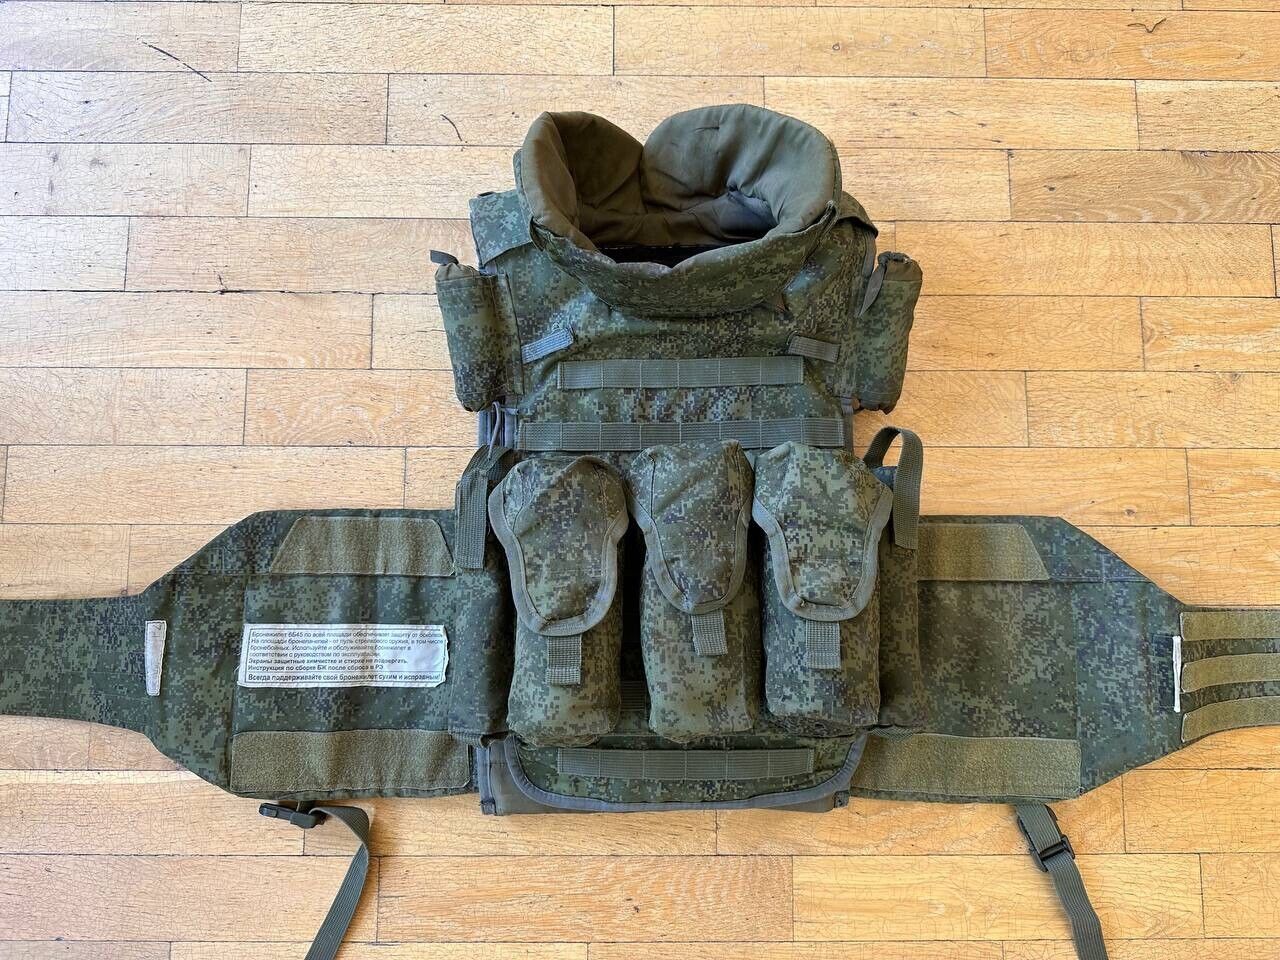 Original Used Military Russian Army plate carrier molle vest 6B45 Ratnik size 2